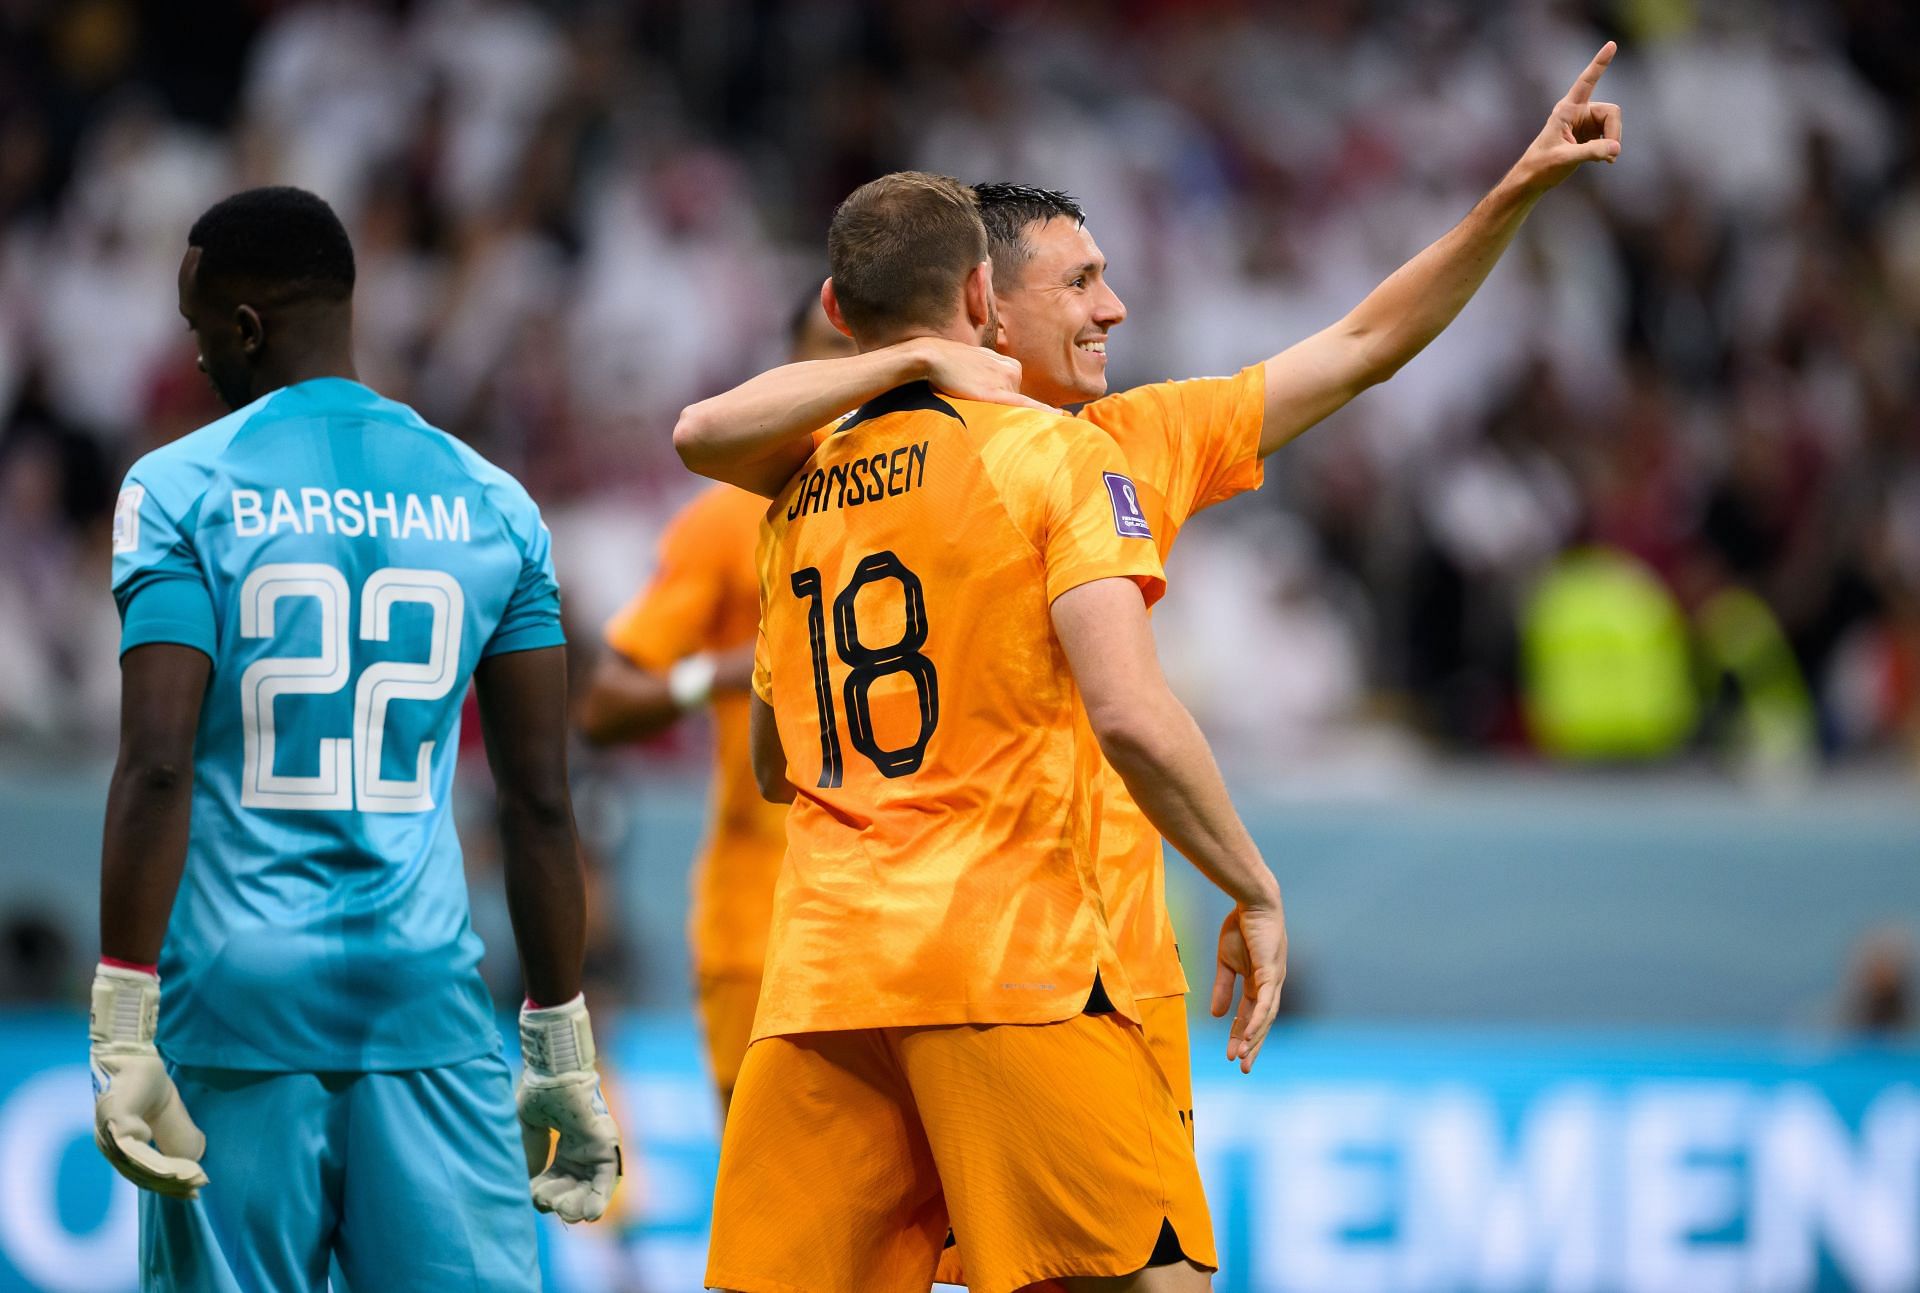 USA-Netherlands Men's World Cup Player Ratings 12/03/2022